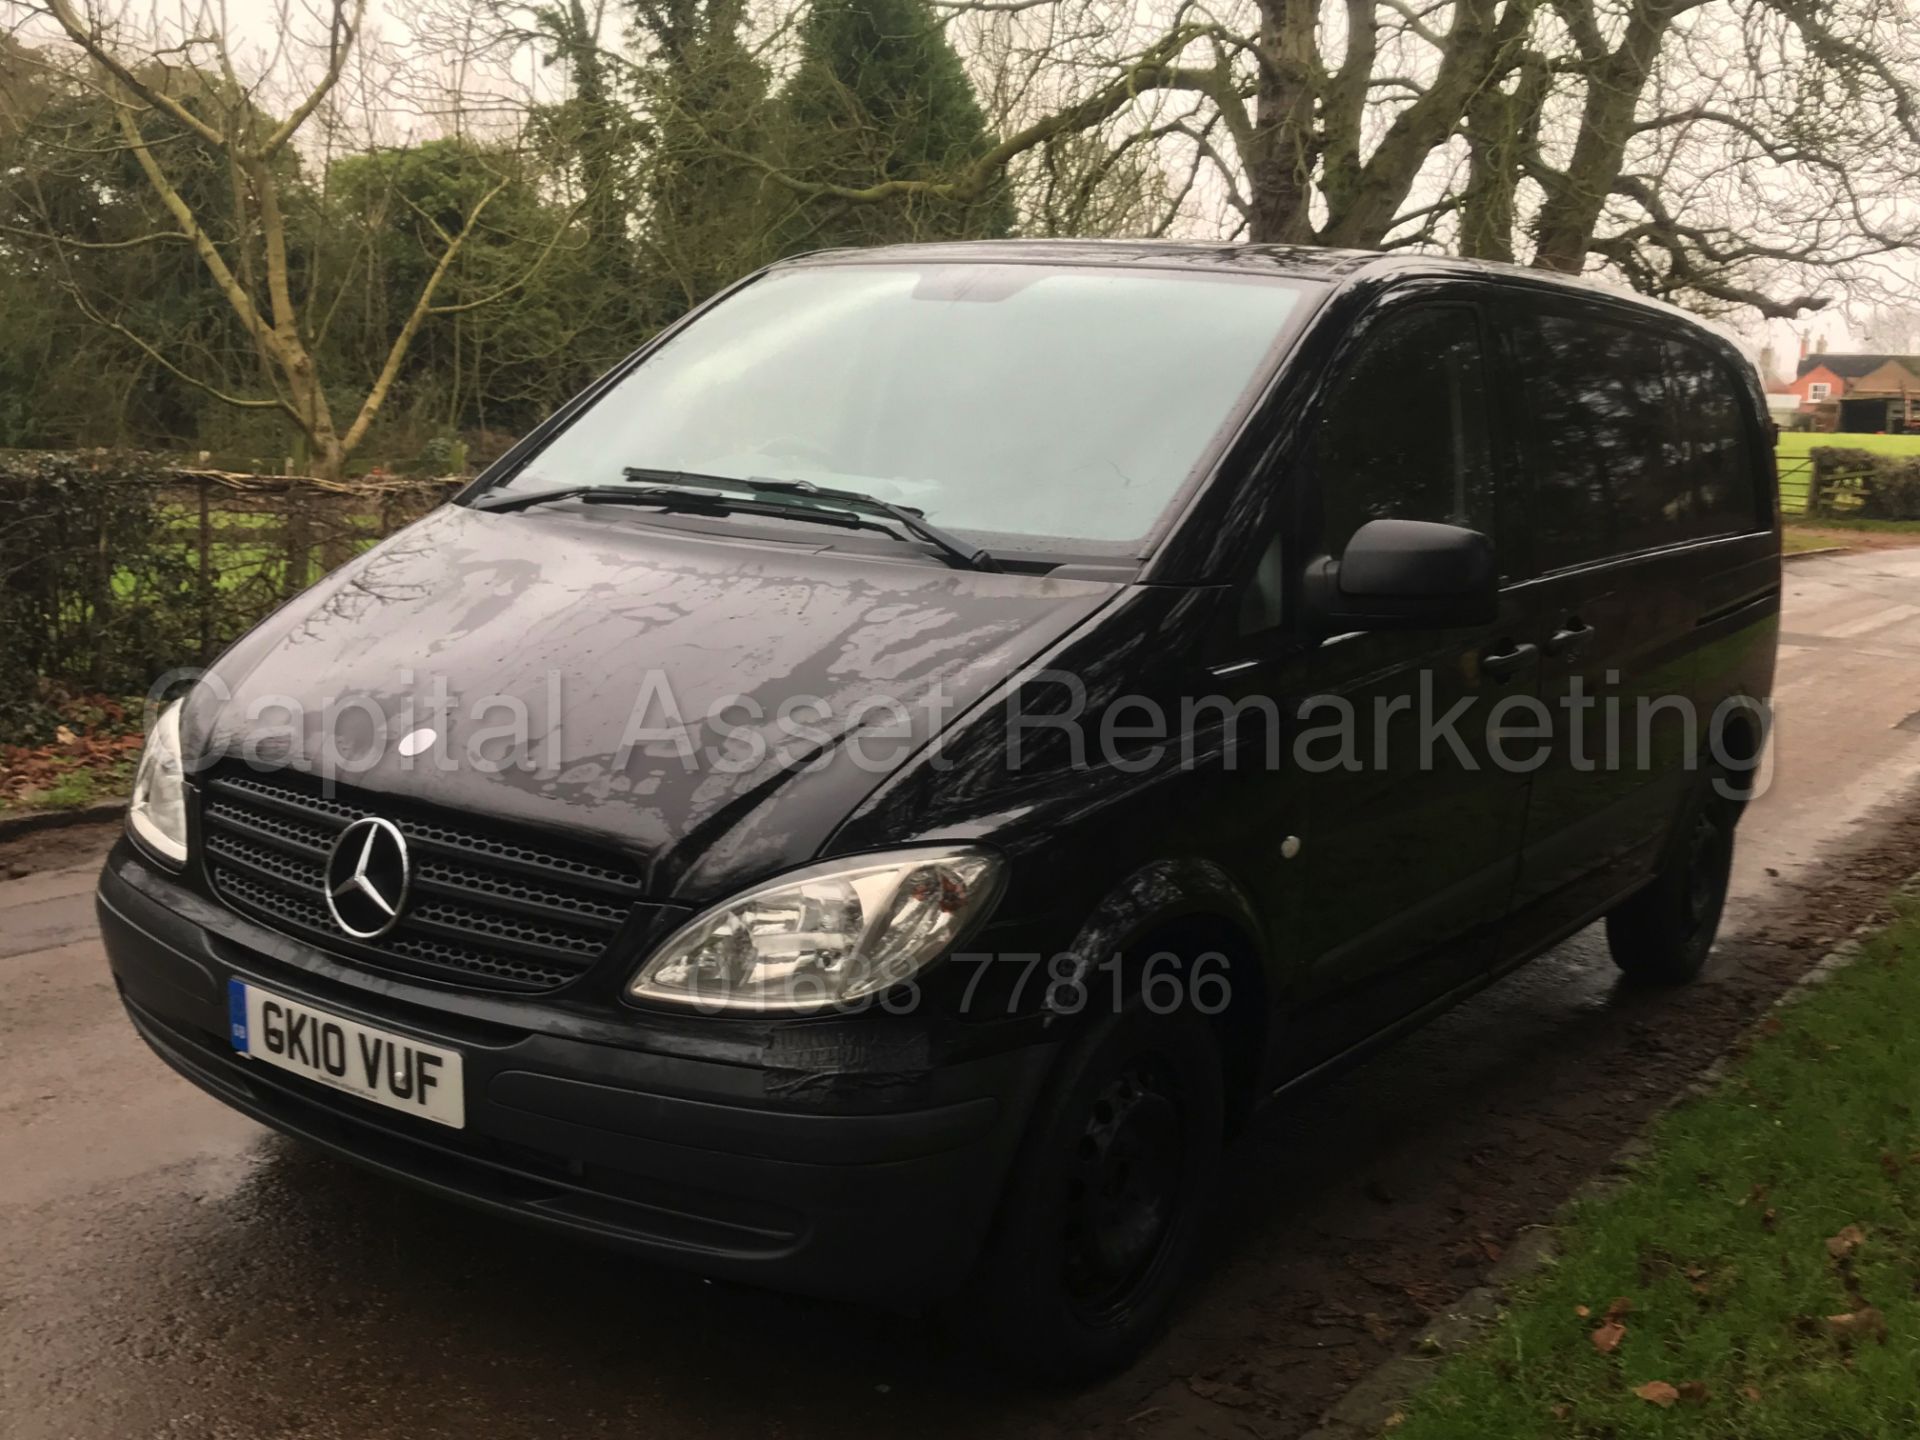 MERCEDES VITO CDI "115BHP - AUTOMATIC" (2010 - 10 REG) SPORTY VAN - AIR CON - ELEC PACK - 1 OWNER !! - Image 5 of 25